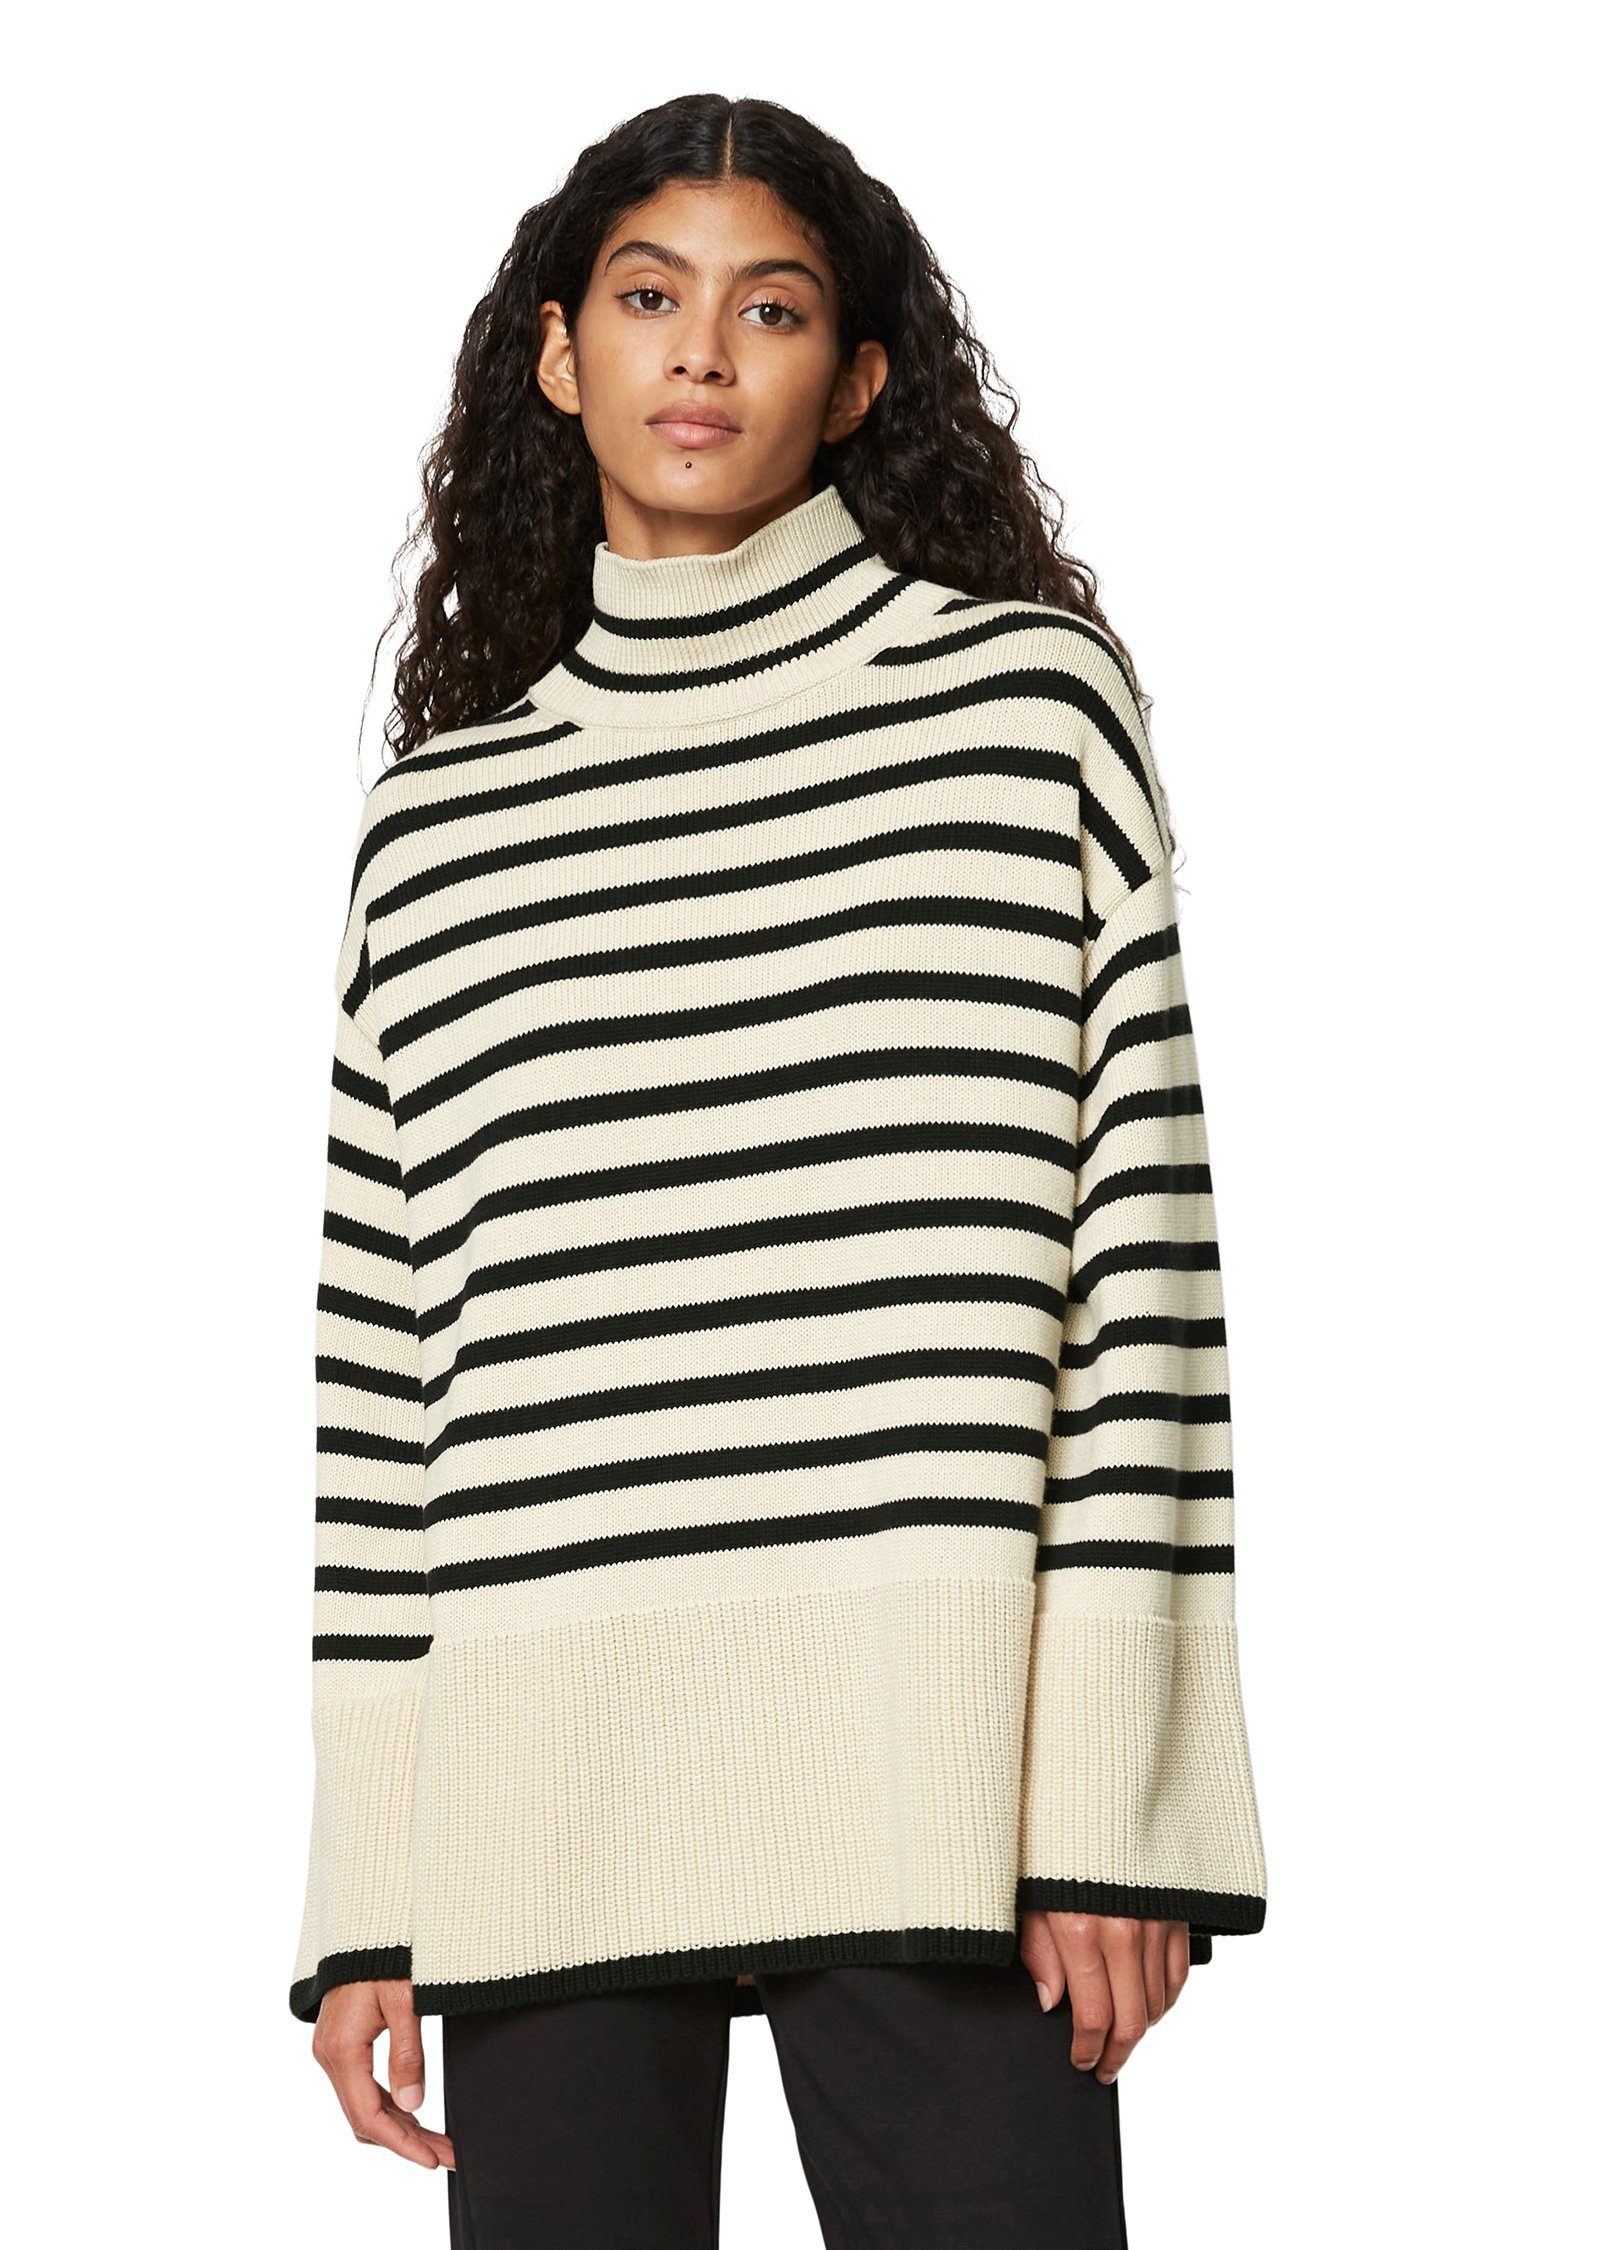 Marc sand multi/chalky oversized O'Polo Strickpullover